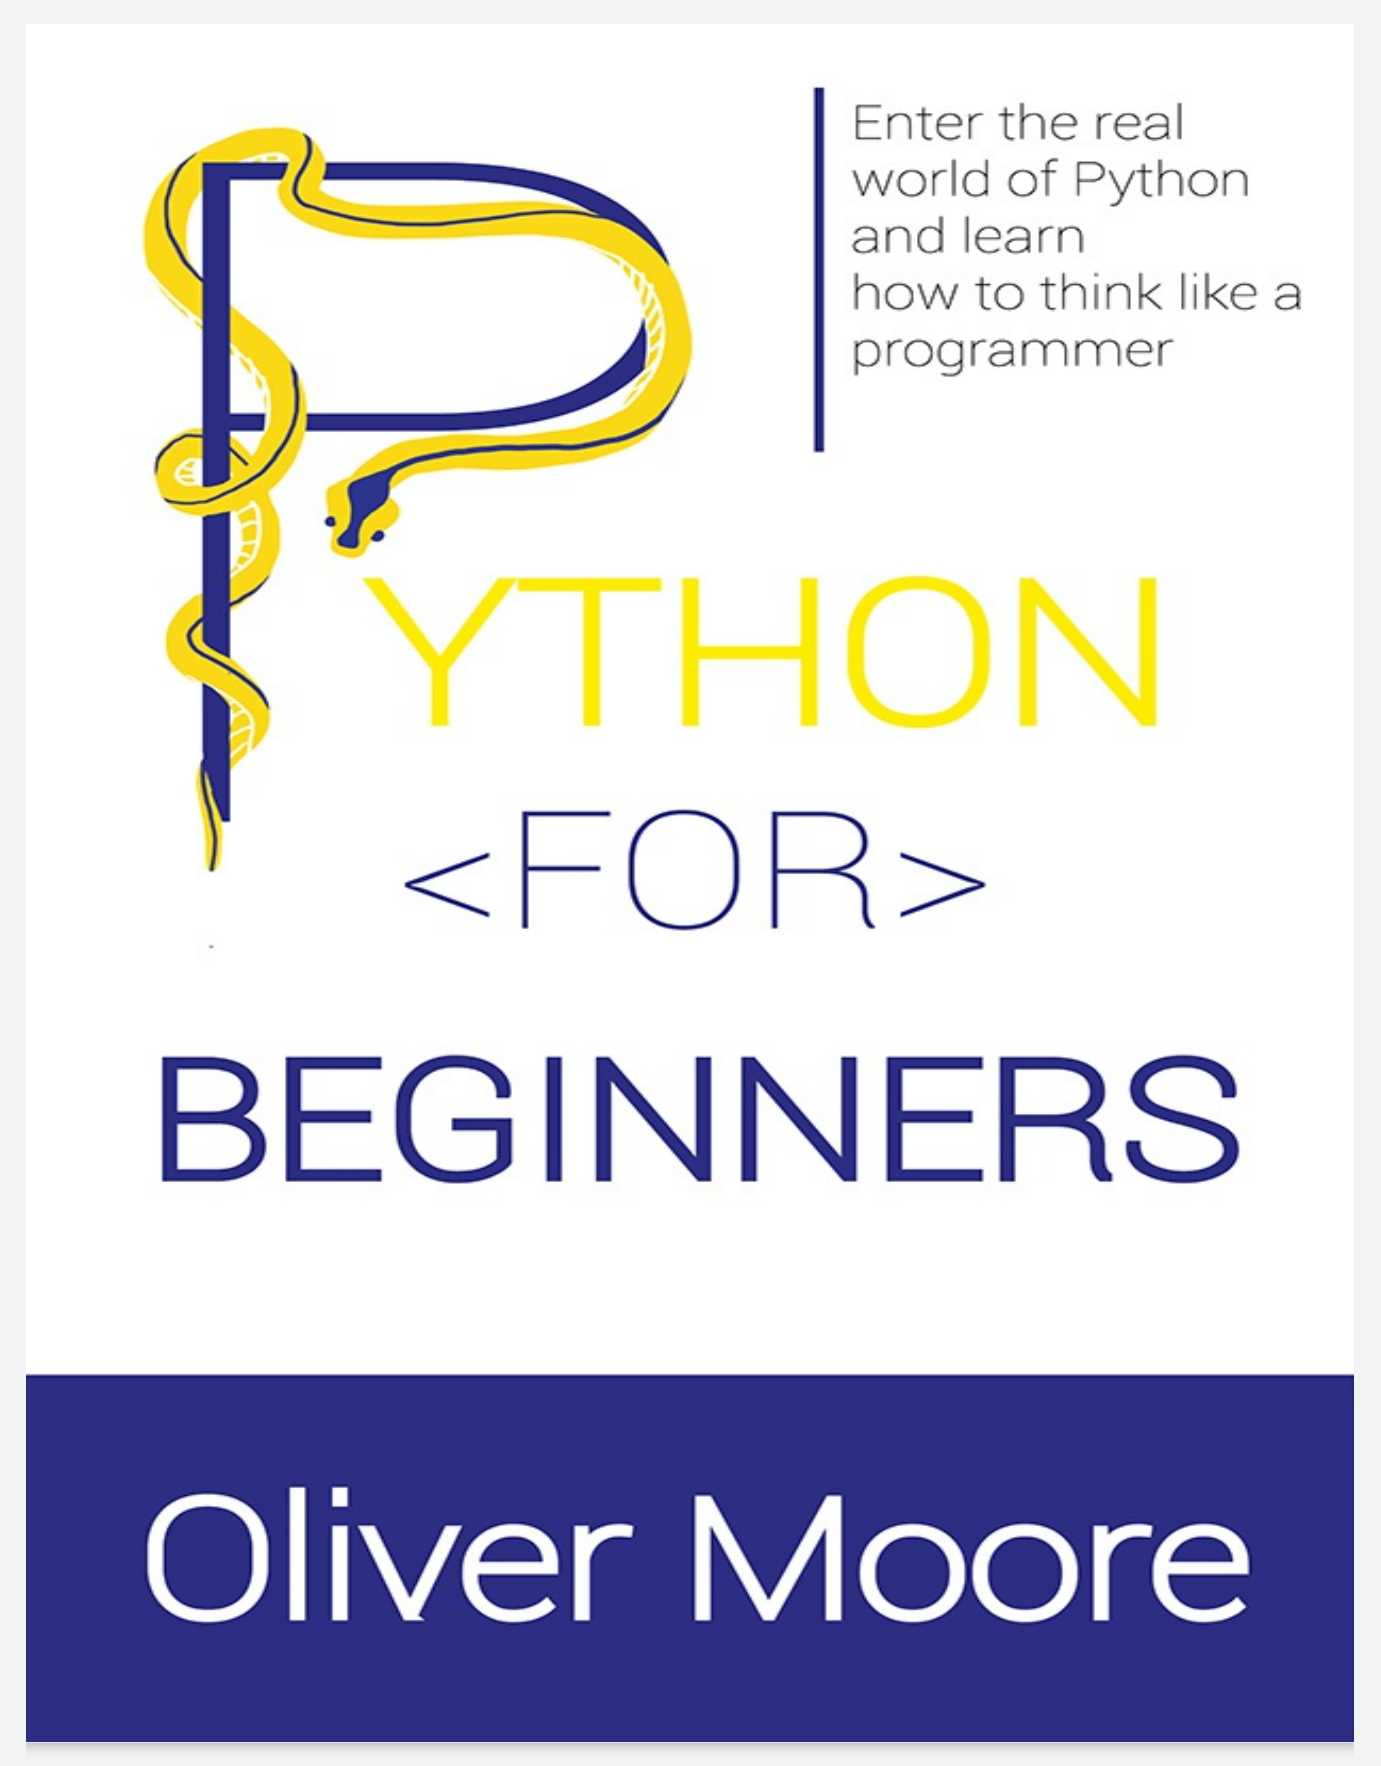 PYTHON FOR BEGINNERS: Enter the Real World of Python and Learn How to Think Like a Programmer